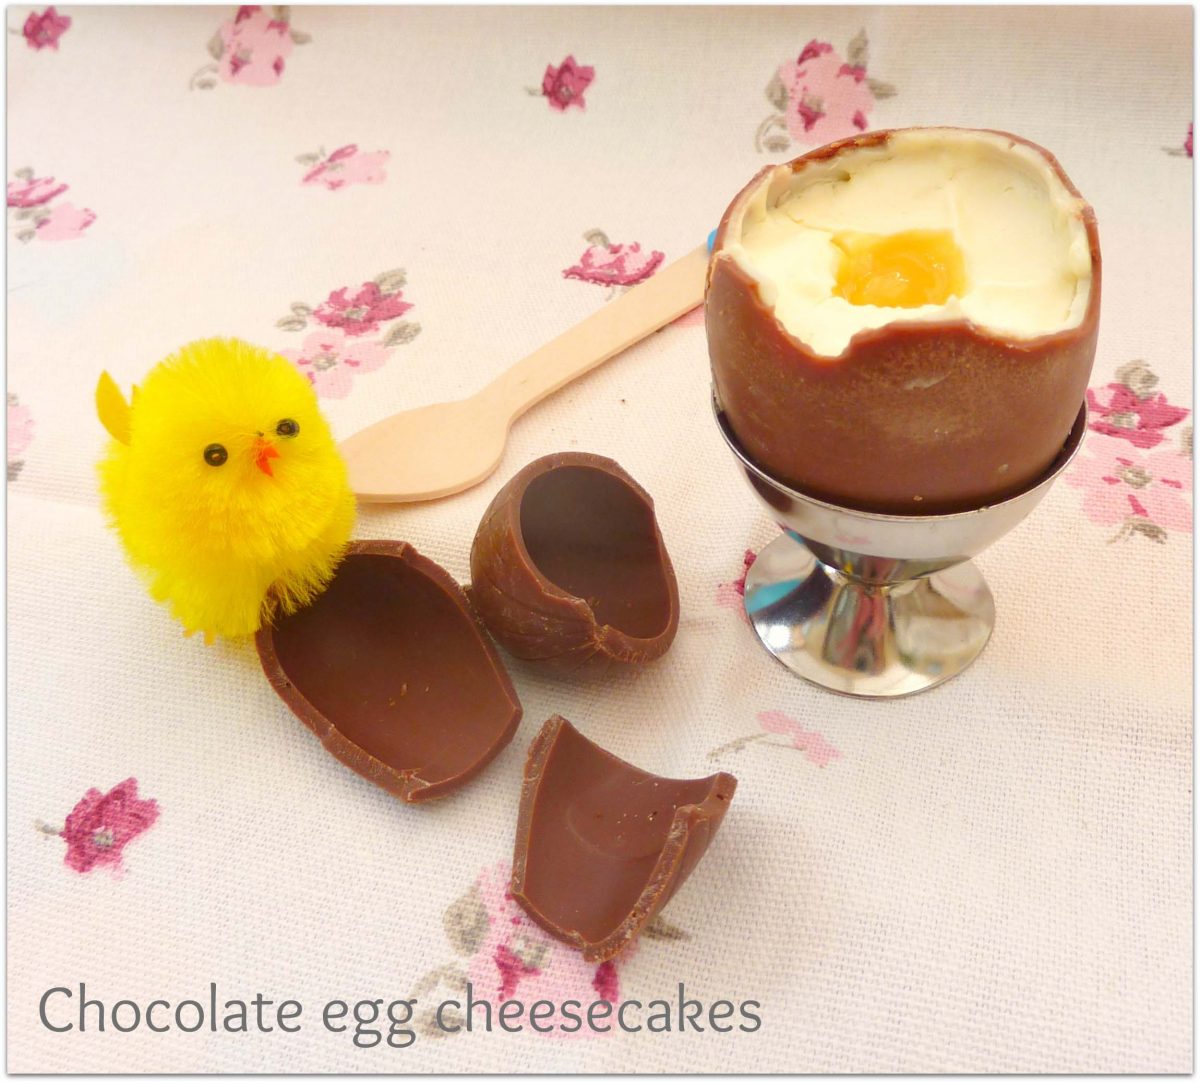 Chocolate egg cheesecakes with Easter chick